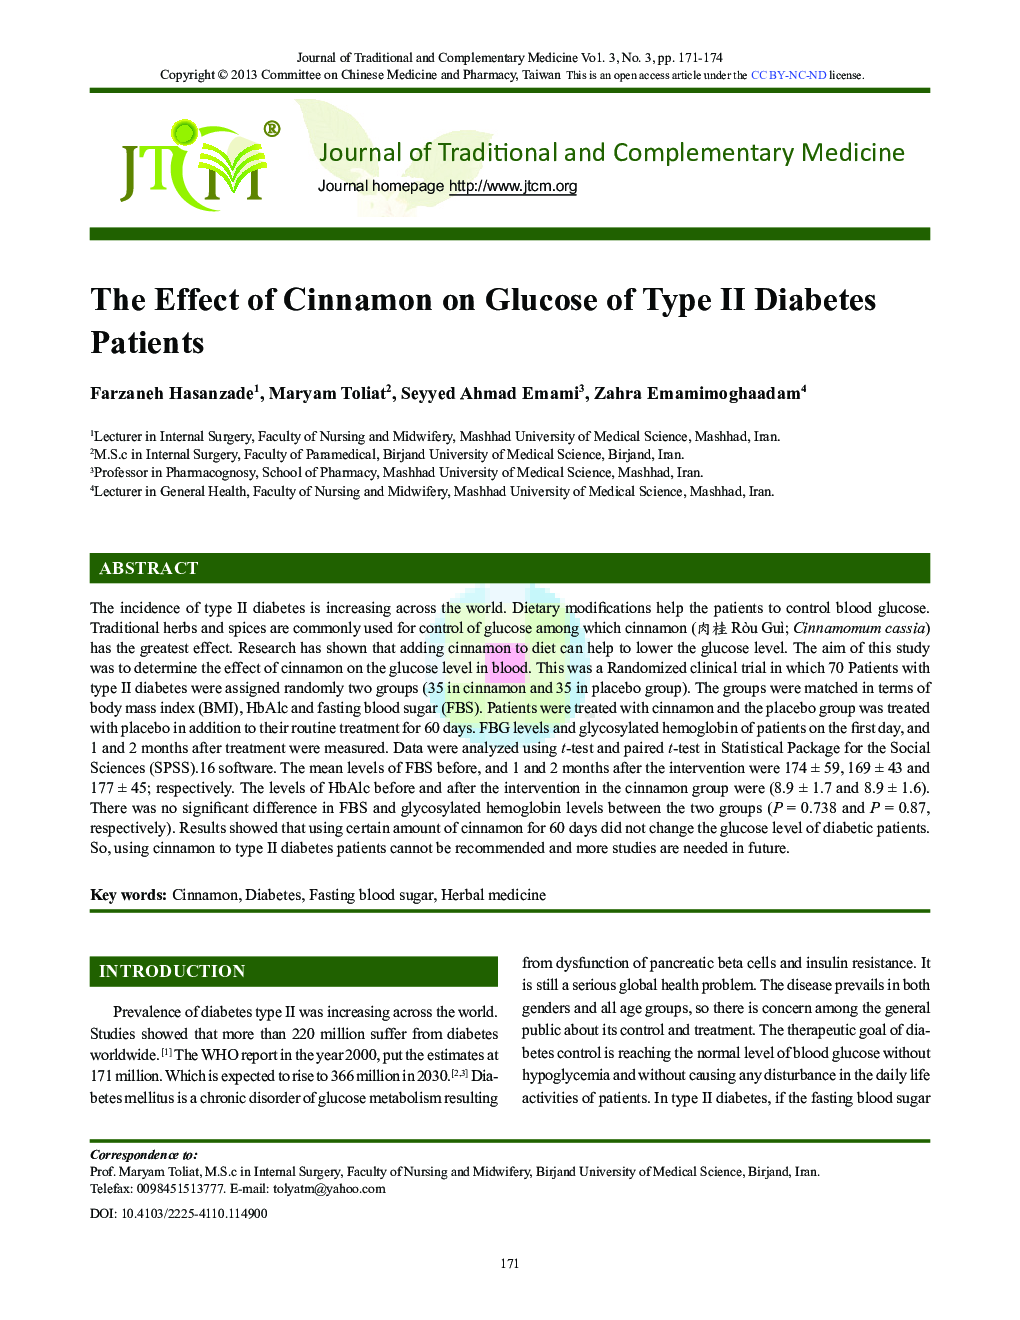 The Effect of Cinnamon on Glucose of Type II Diabetes Patients